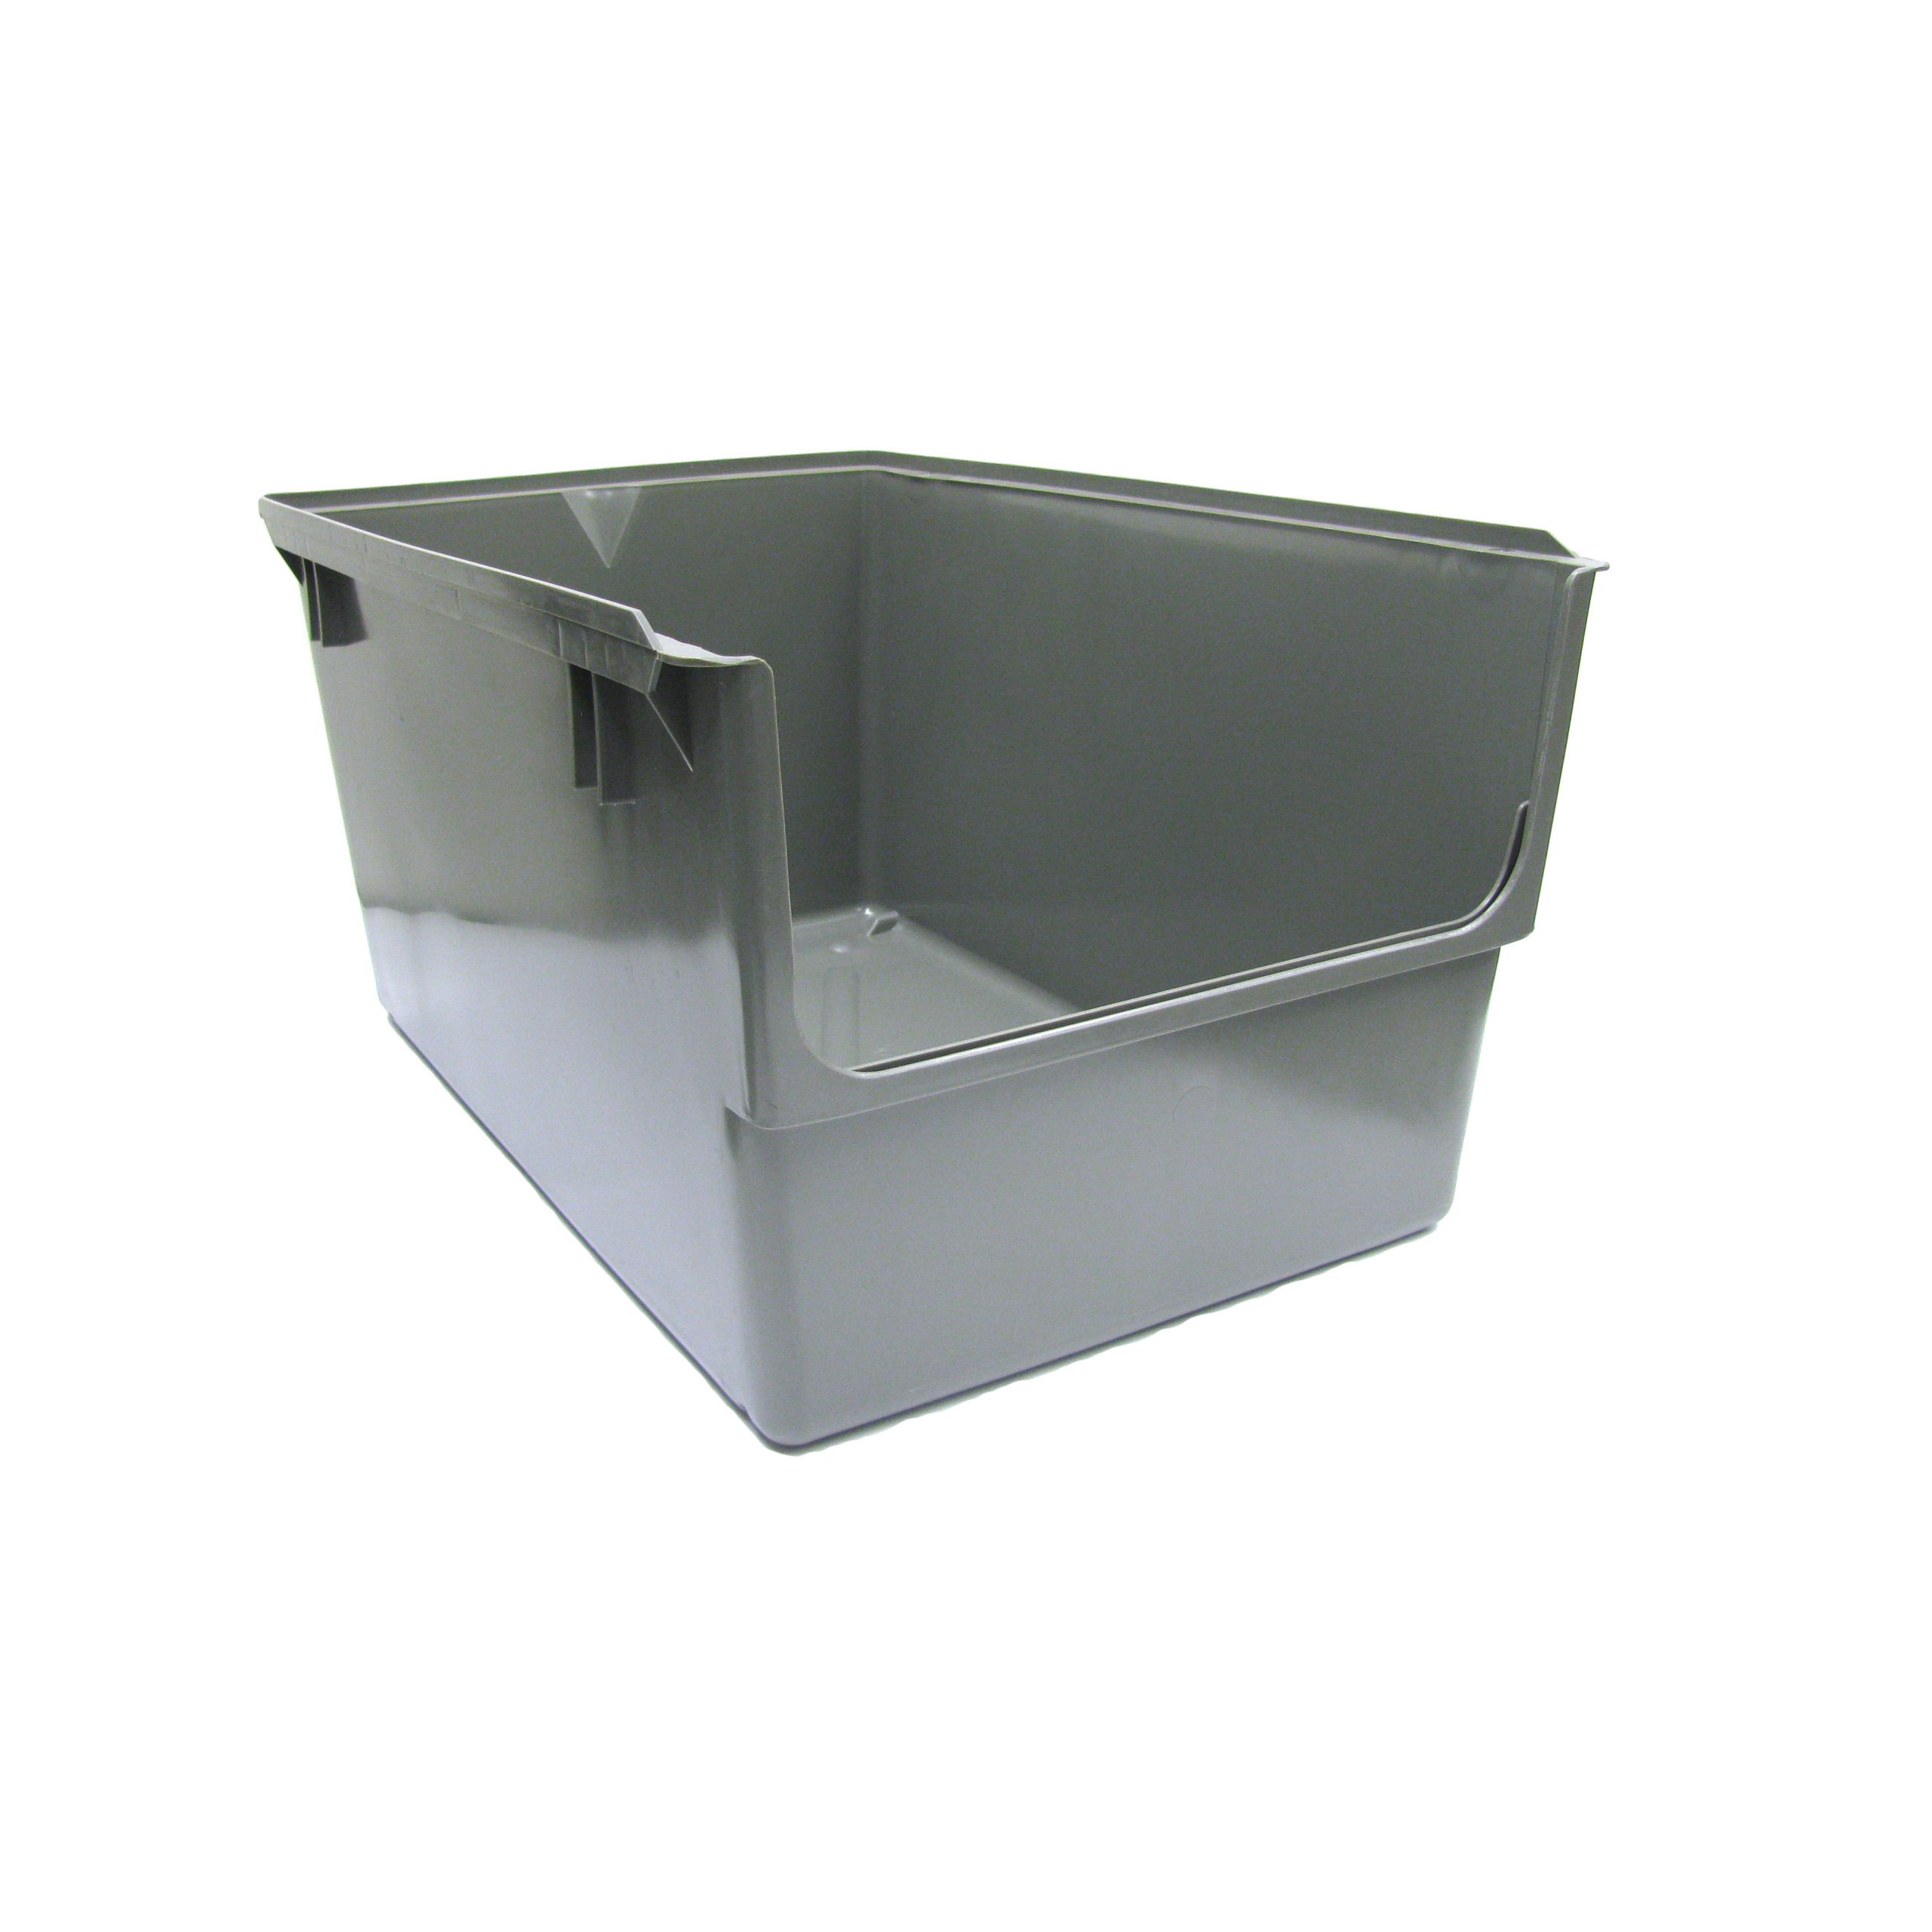 Plastic Hopper Bins, Large Storage Containers